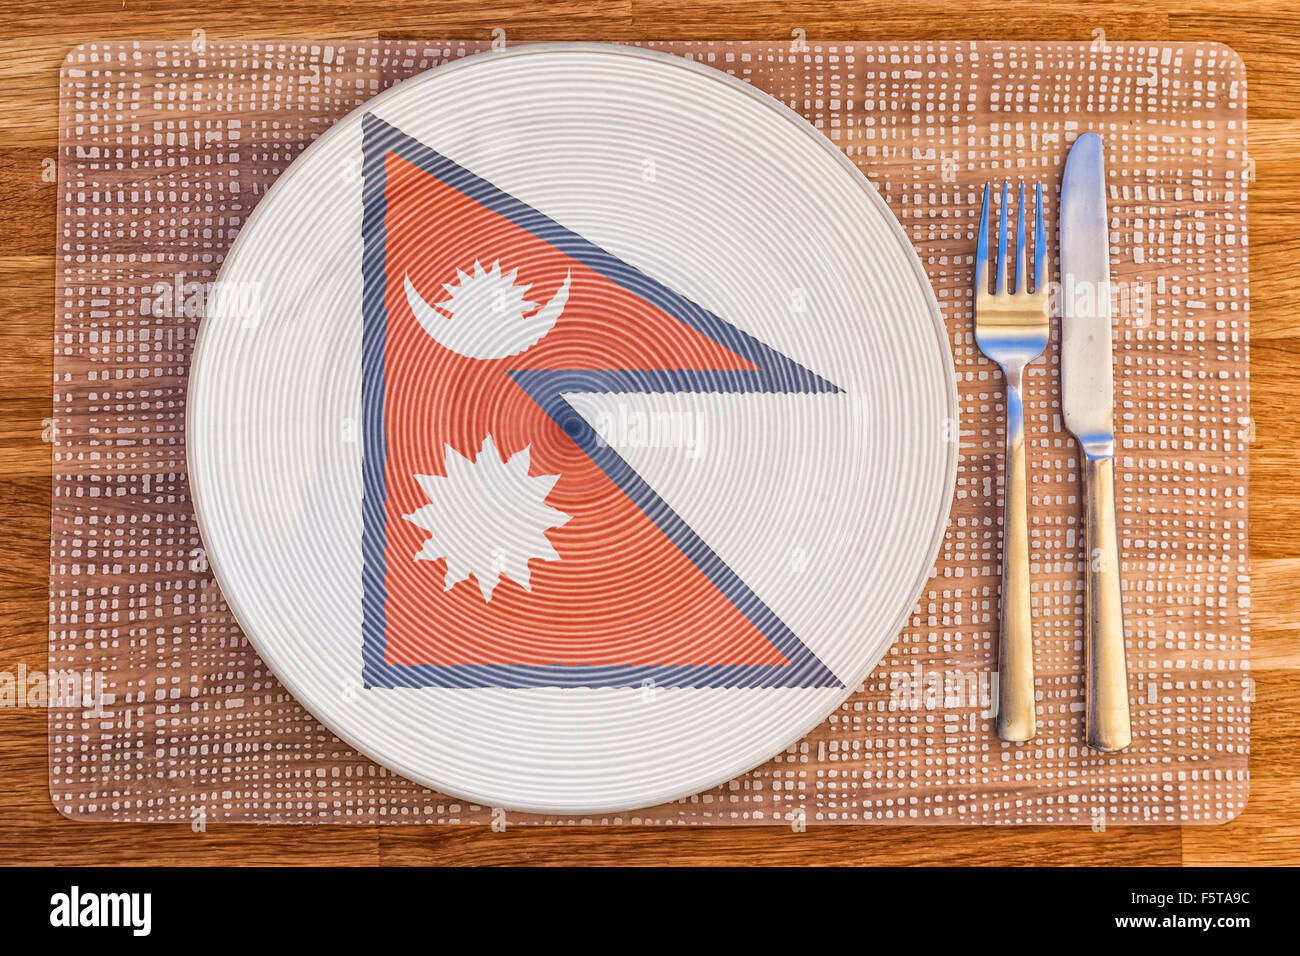 Dinner plate with the flag of Nepal on it for your international food and drink concepts. Stock Photo